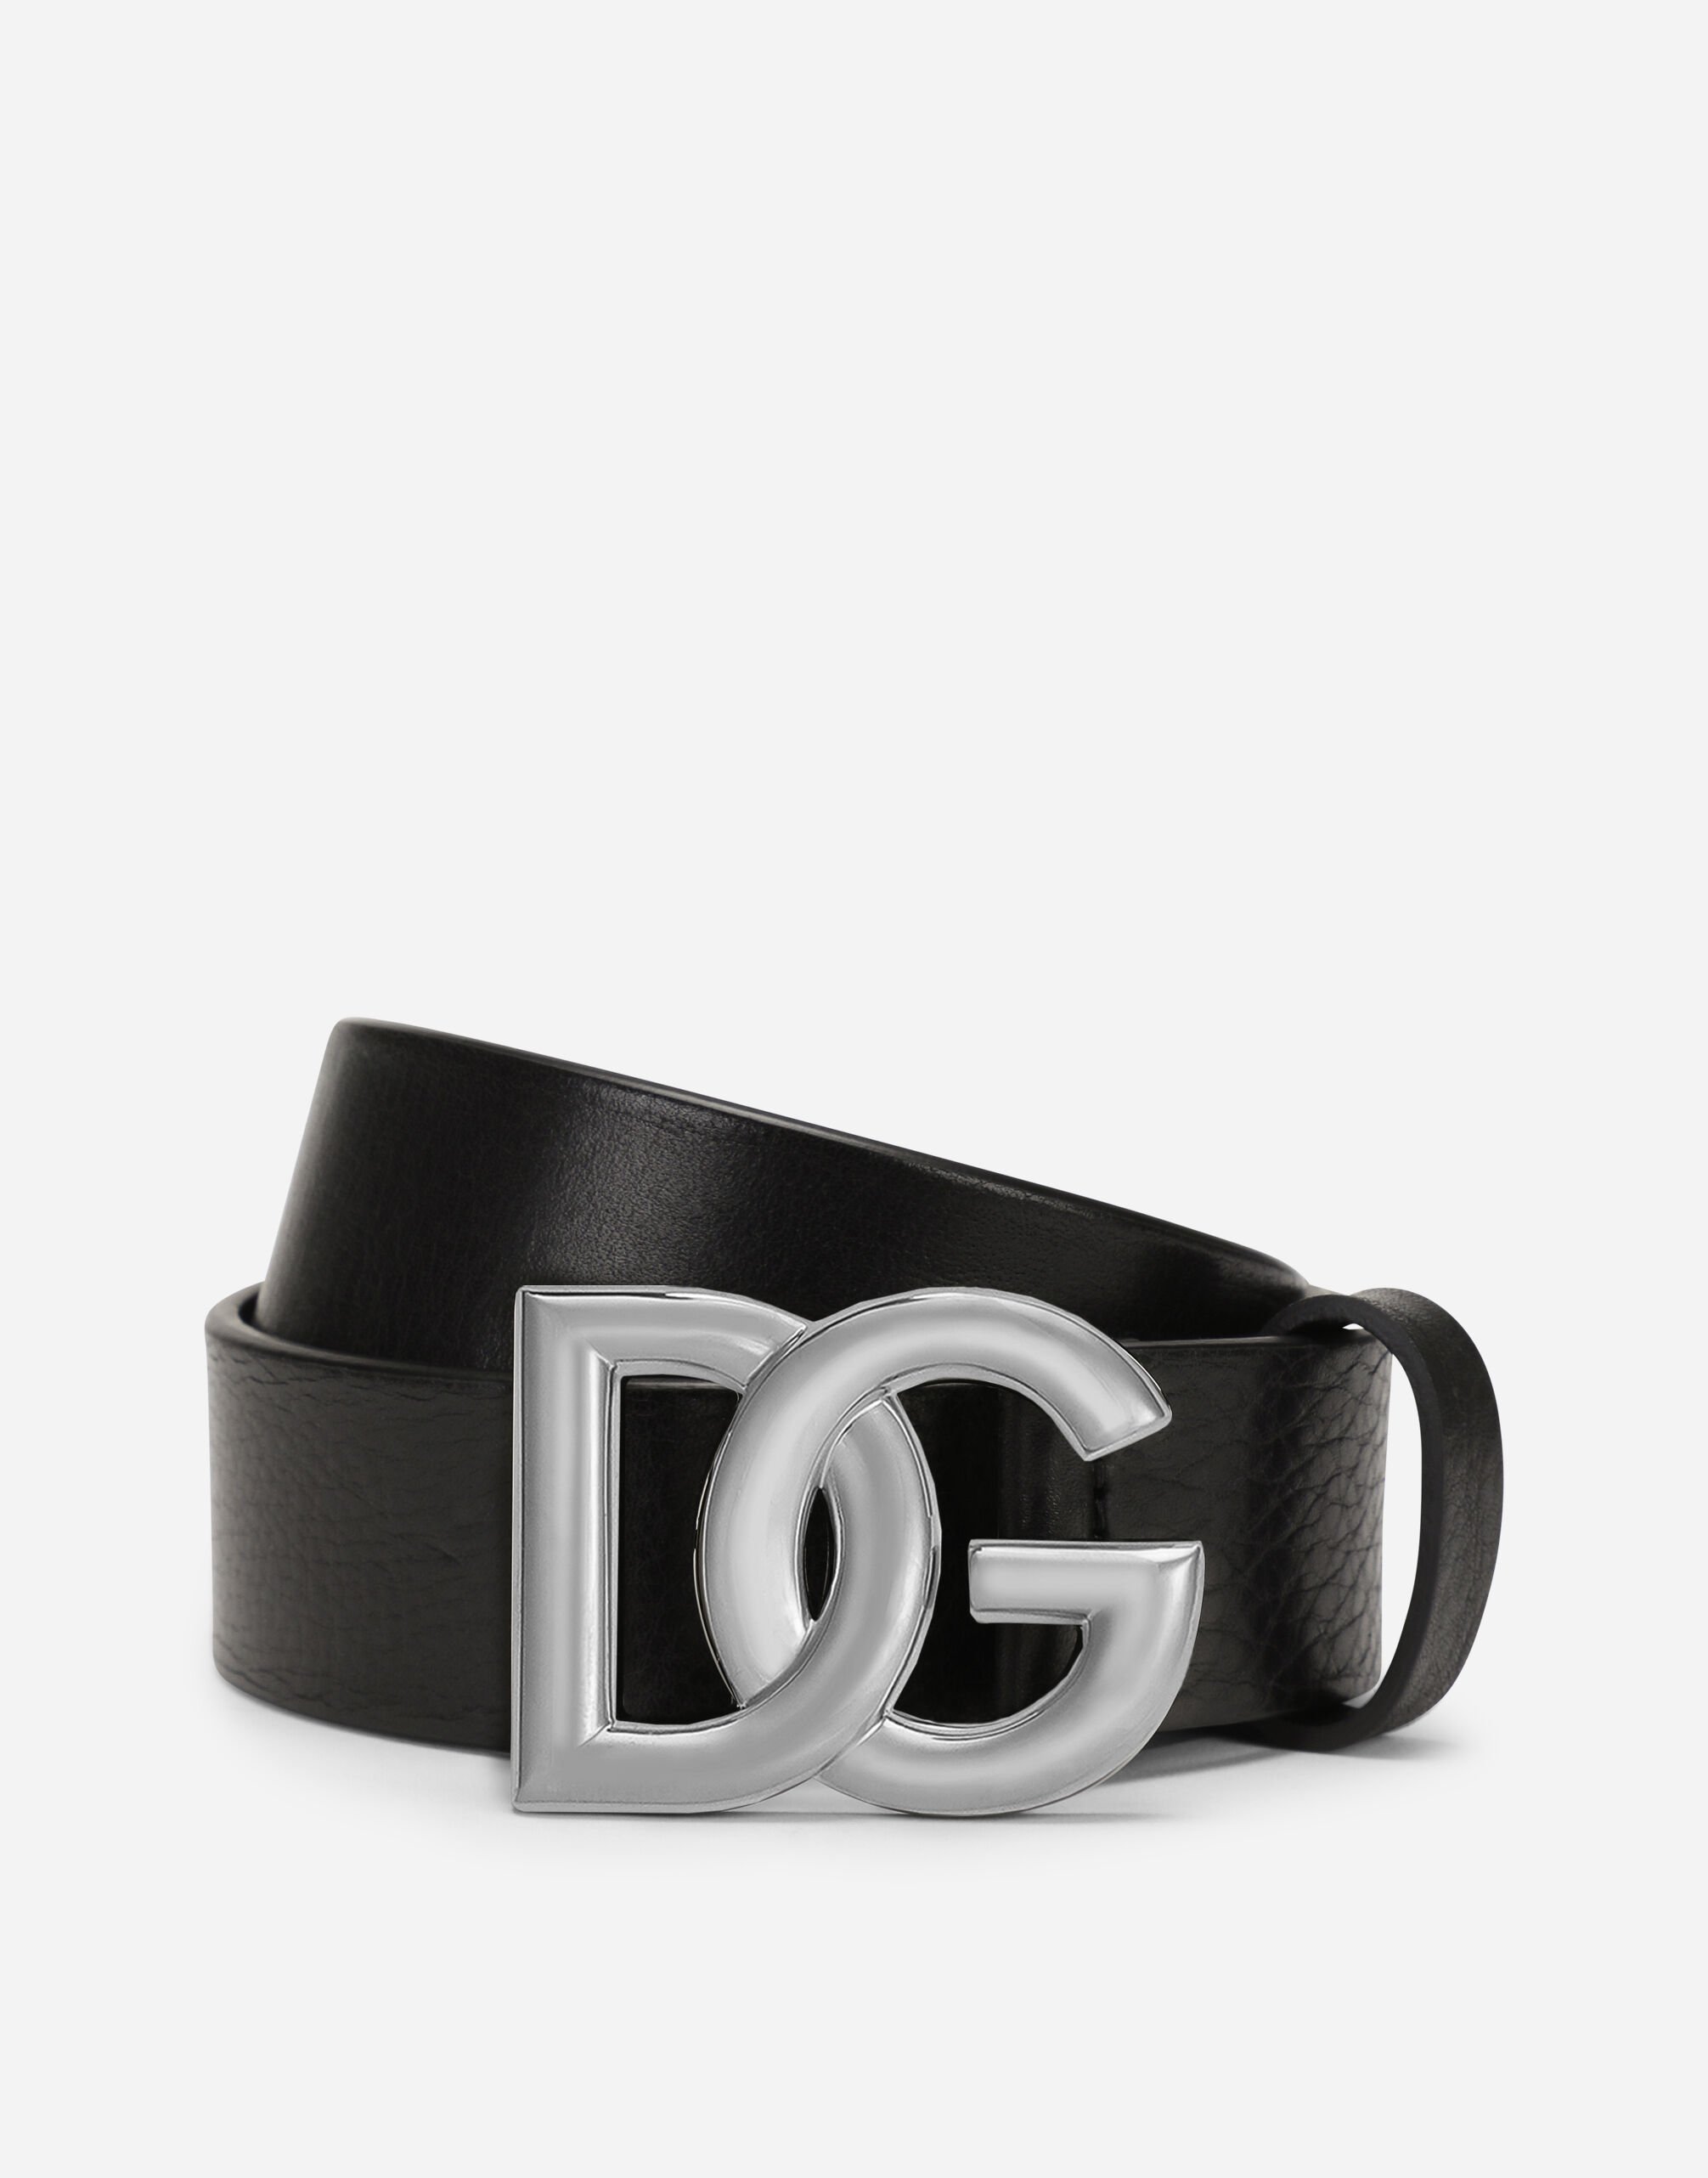 Dolce & Gabbana Tumbled leather belt with crossover DG logo buckle Black BC4646AX622